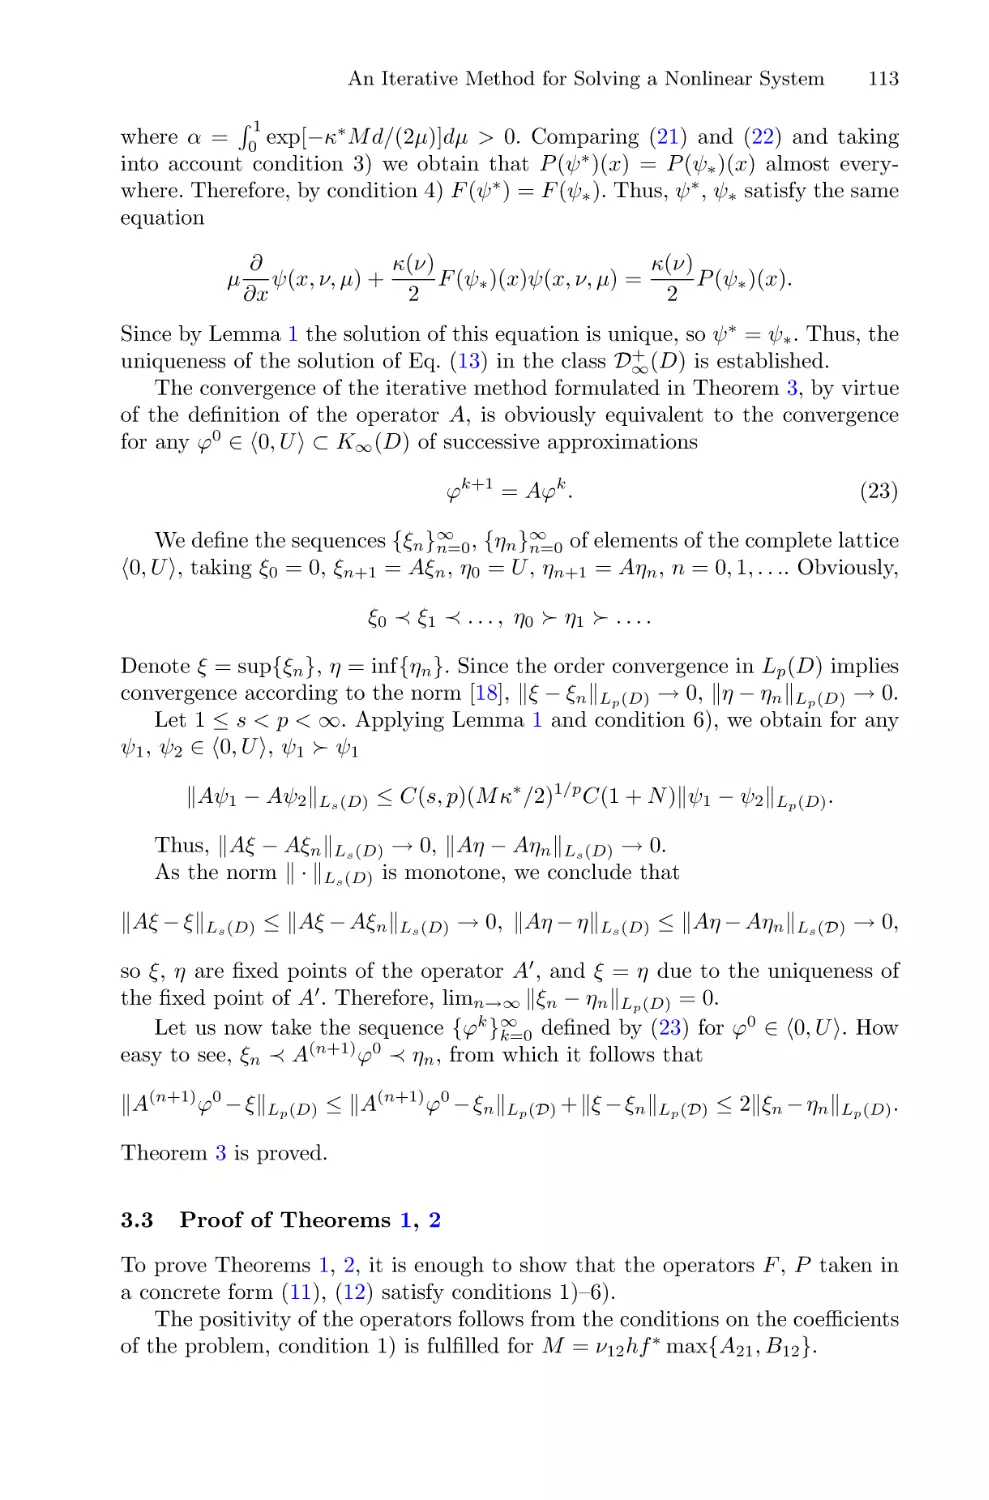 3.3 Proof of Theorems 1, 2